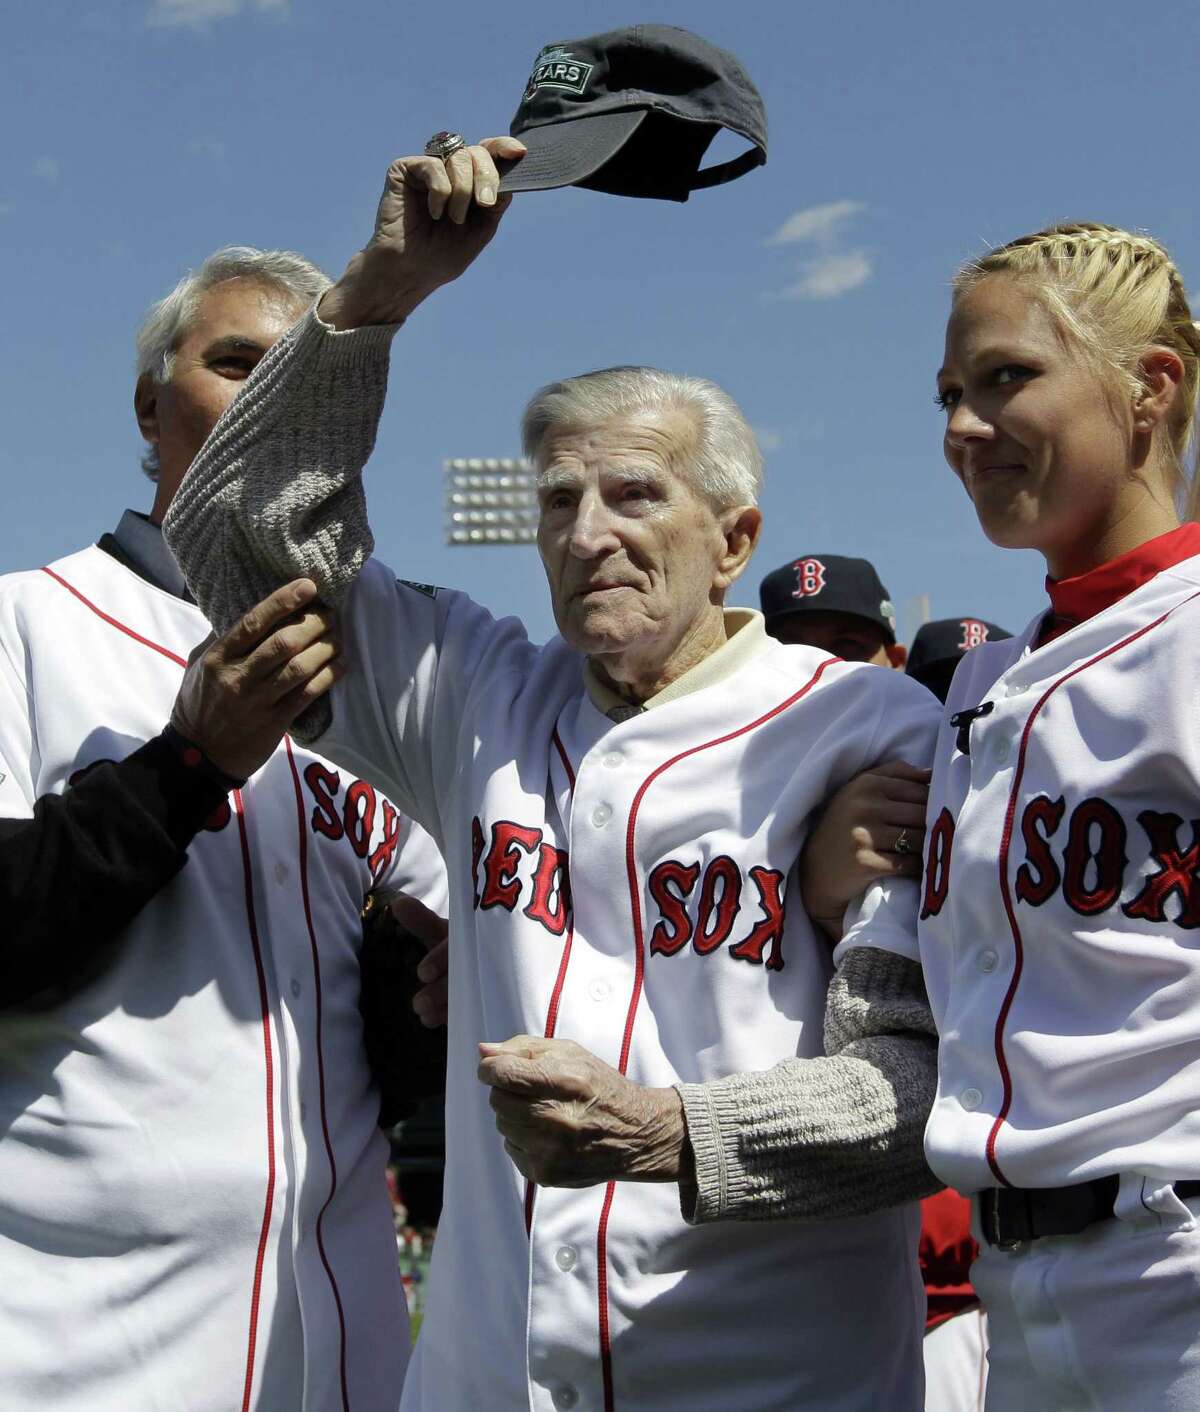 In this April 13, 2012 photo, Boston Red Sox great Johnny Pesky tips his cap to the fans prior to Boston’s home opener baseball game against the Tampa Bay Rays at Fenway Park in Boston. Pesky died in Danvers, Mass. at 92.